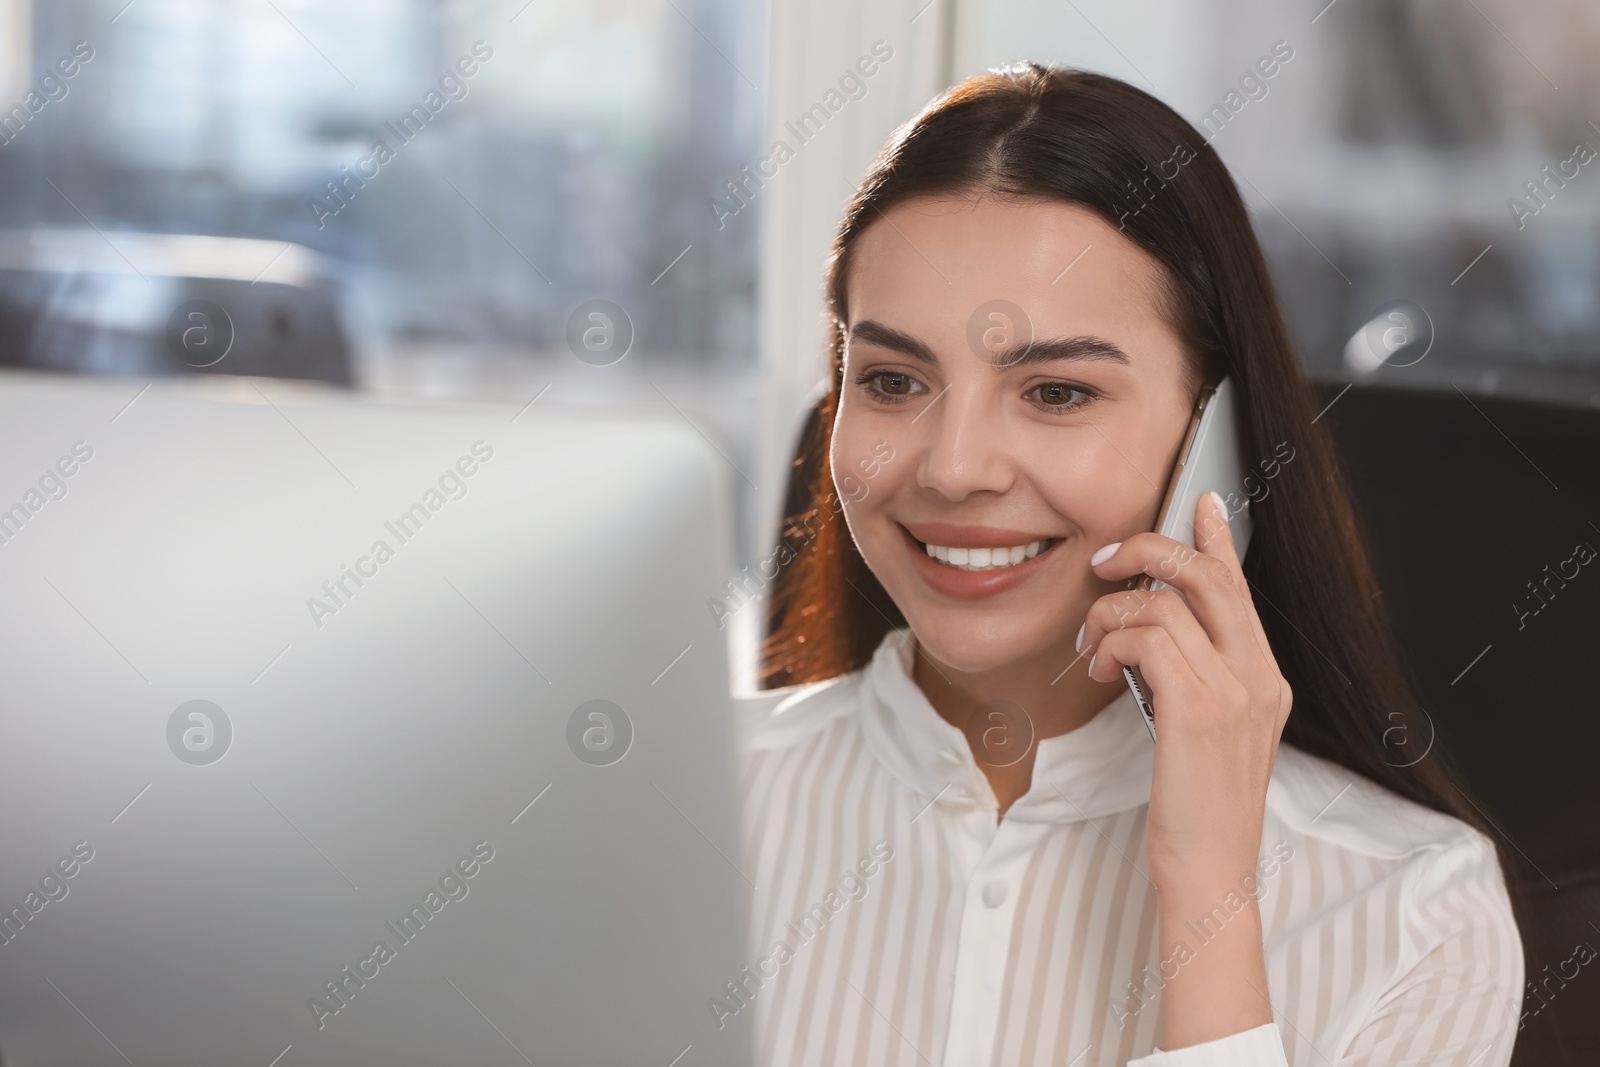 Photo of Happy woman using modern computer while talking on smartphone in office